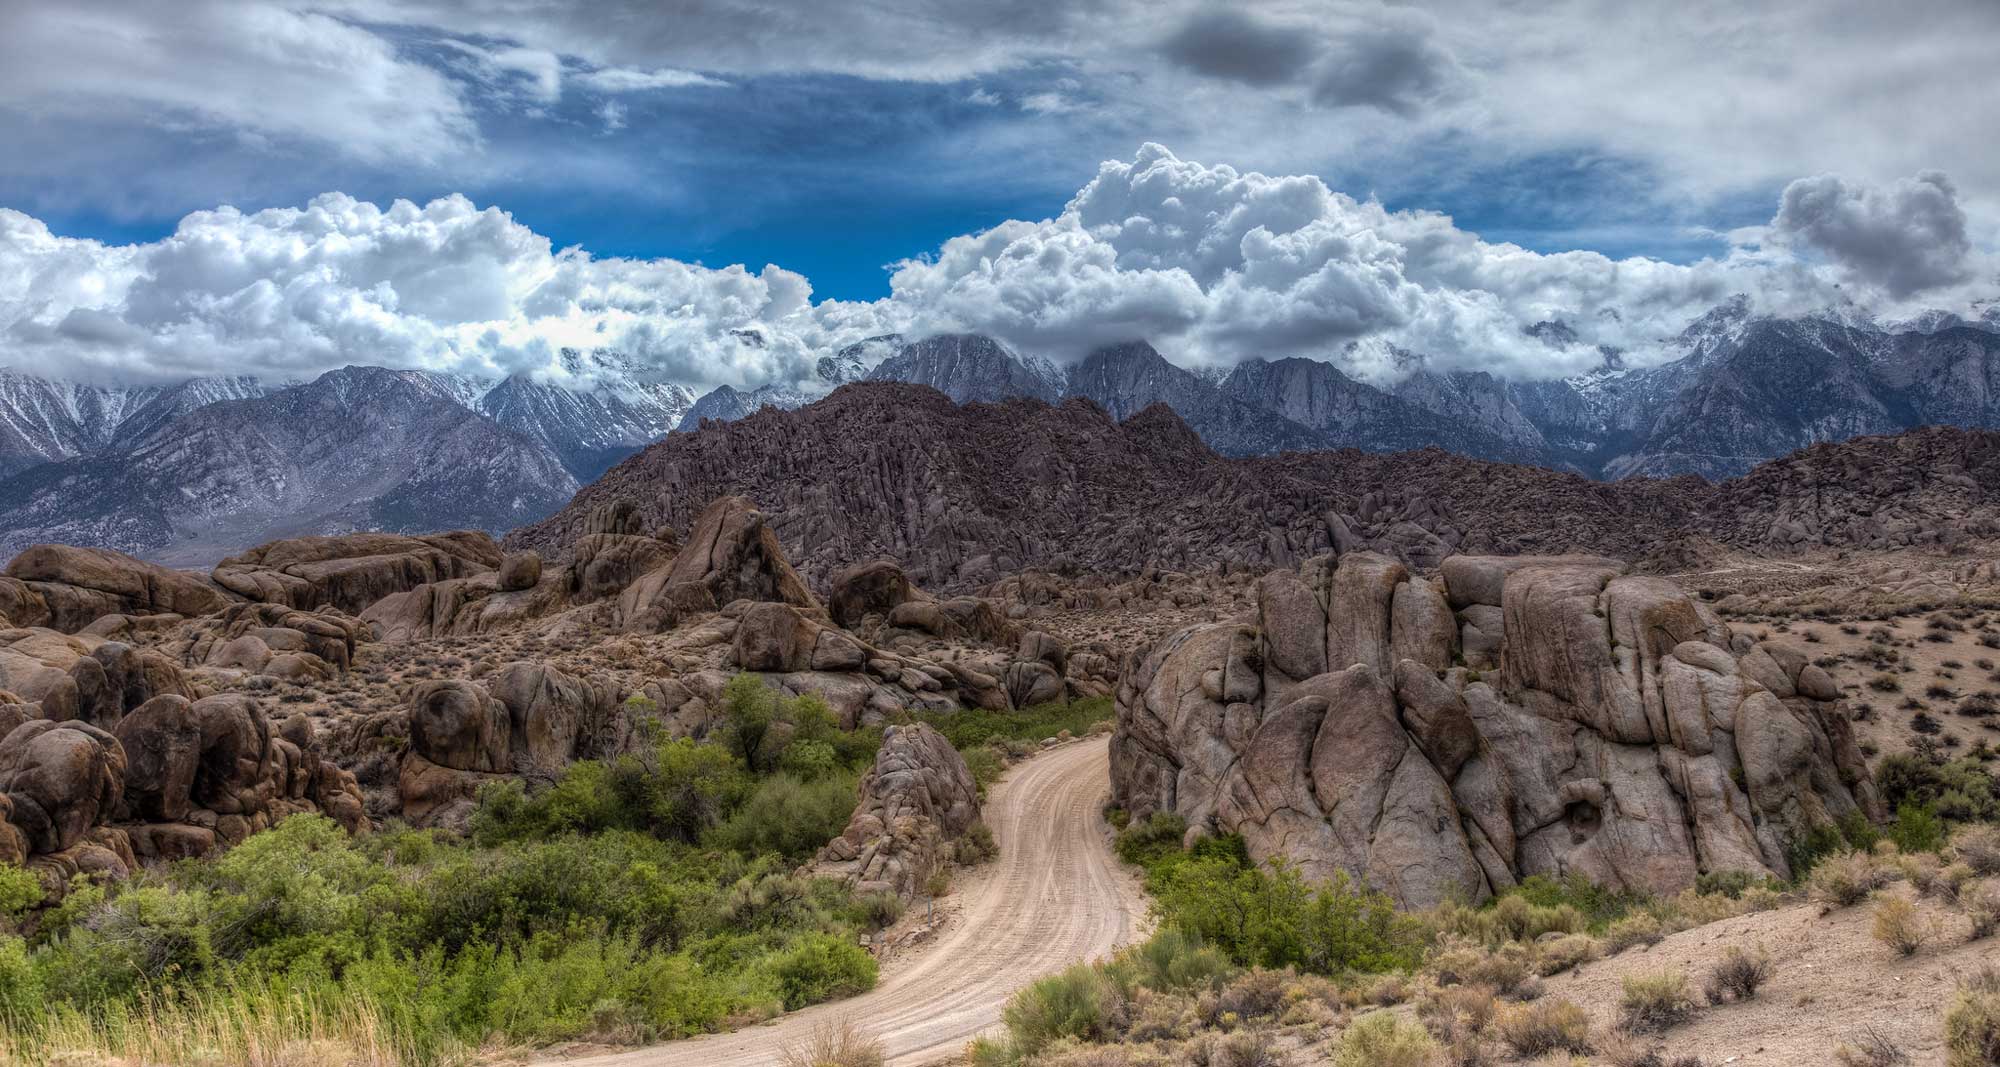 Photograph of the Alabama Hills of California in front of the Sierra Nevada range.